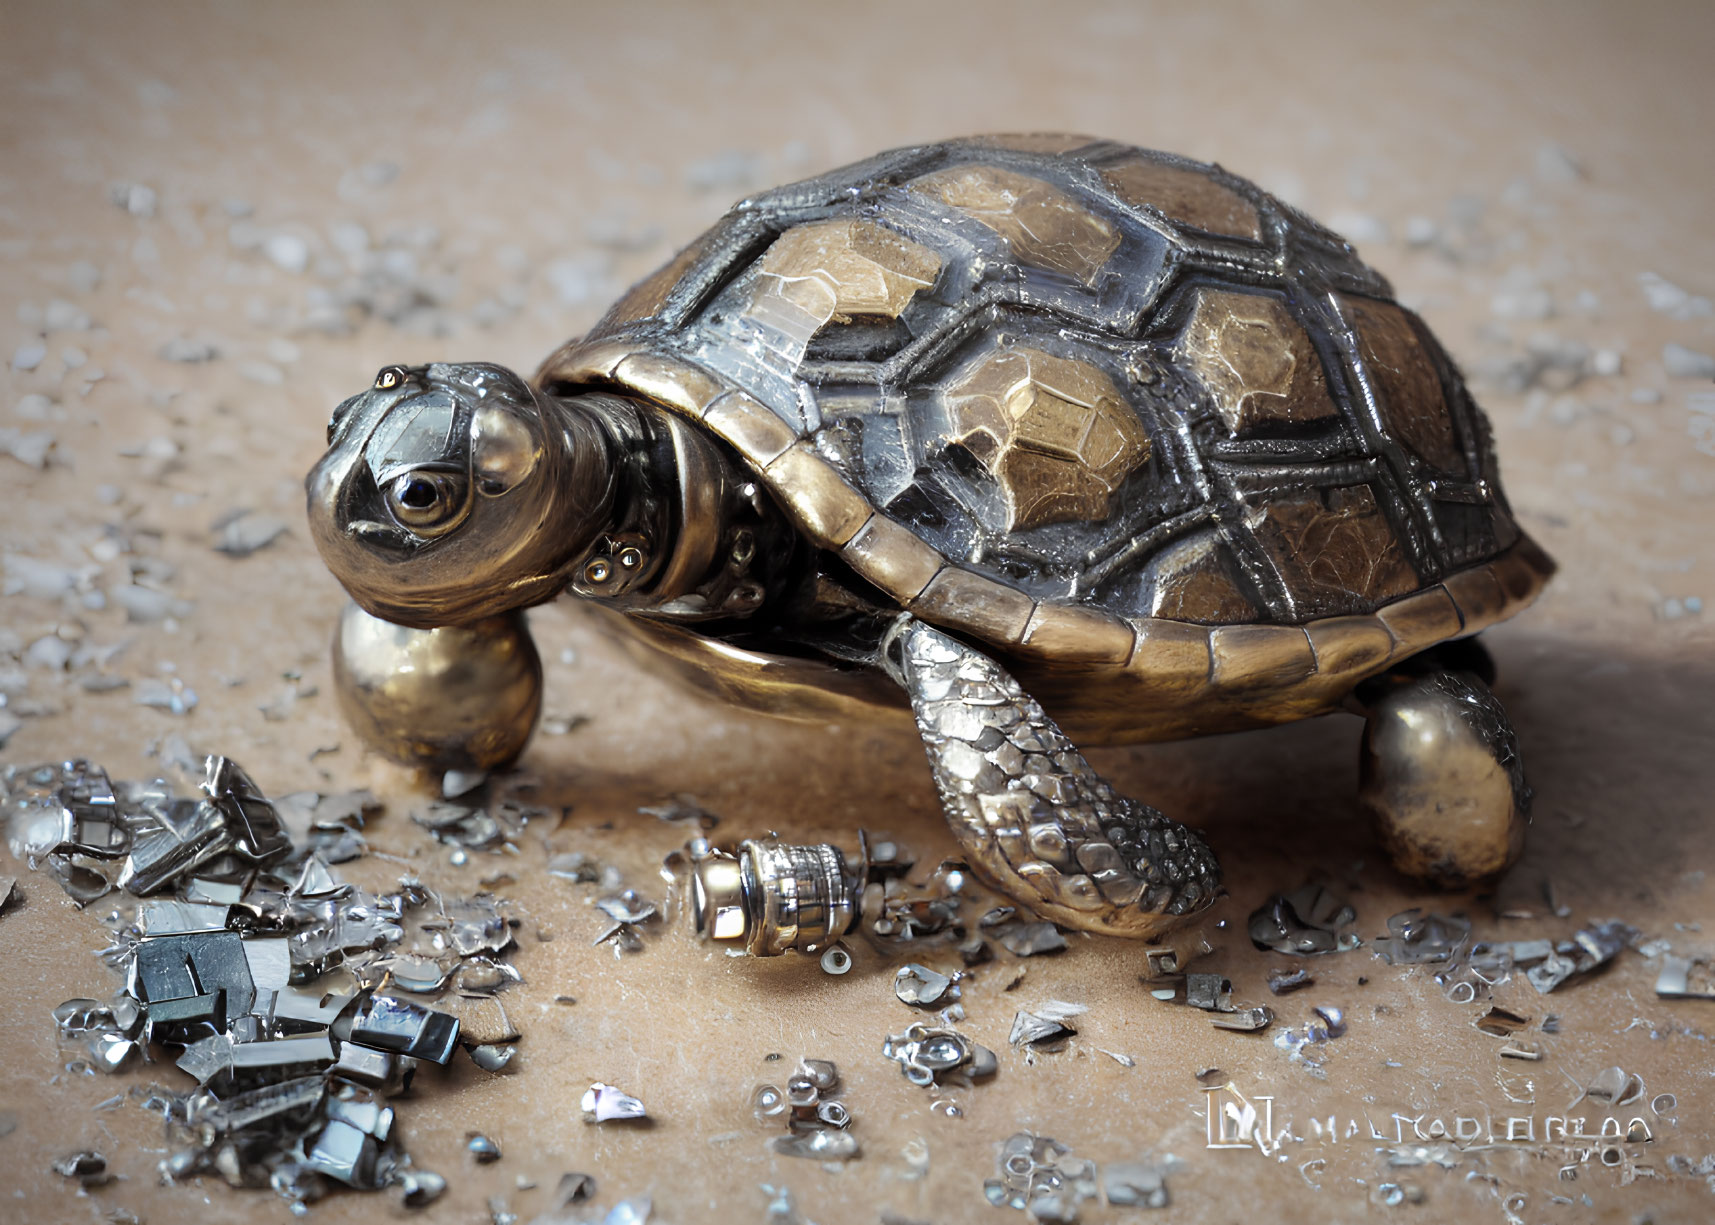 Metallic Turtle Sculpture on Sandy Surface with Miniature Metal Parts